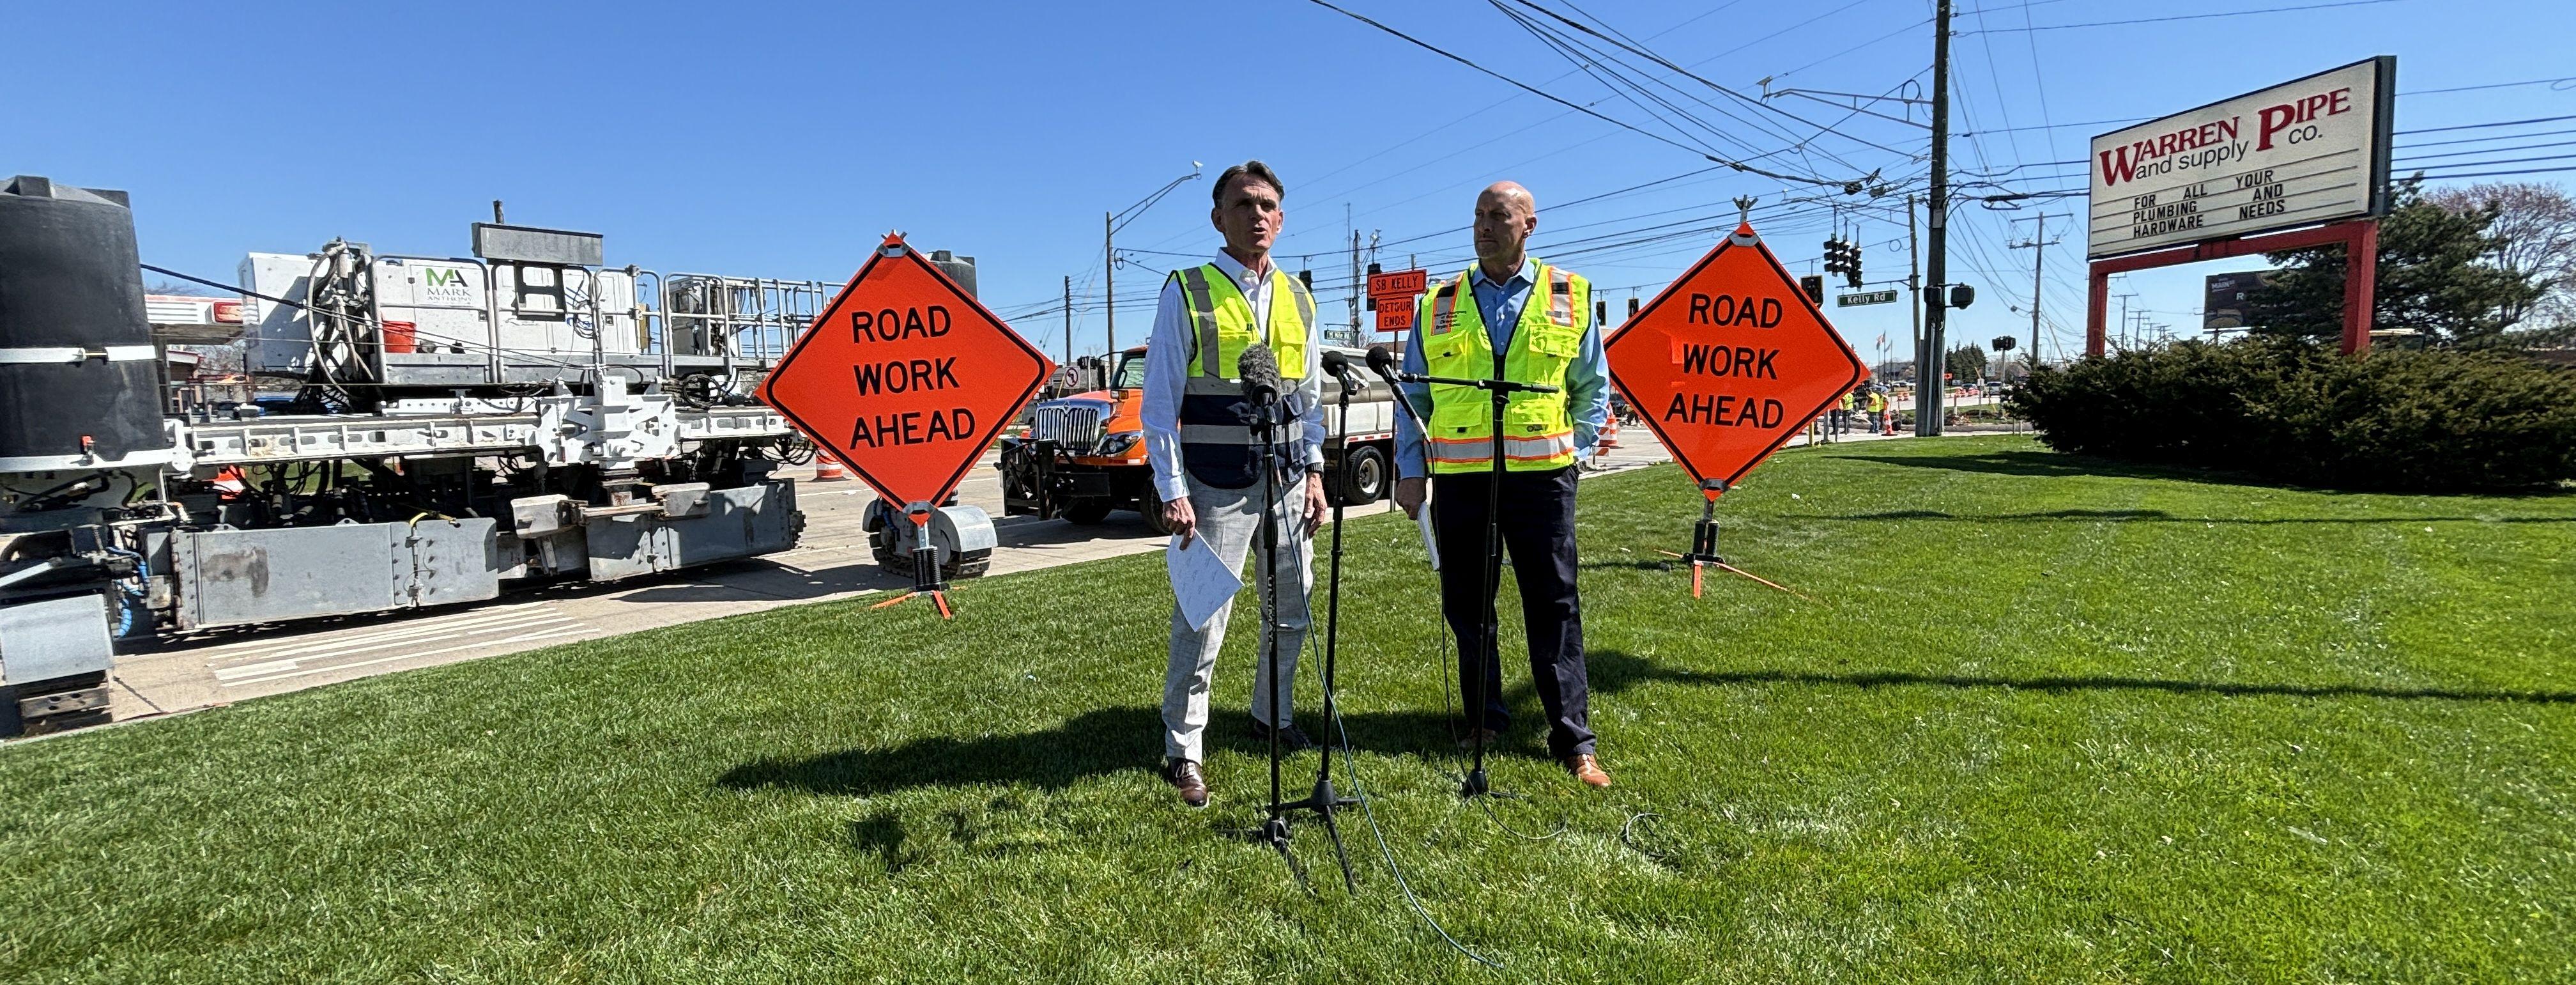 Executive Mark Hackel and Department of Roads Director Bryan Santo give remarks at National Work Zone Safety Week press conference